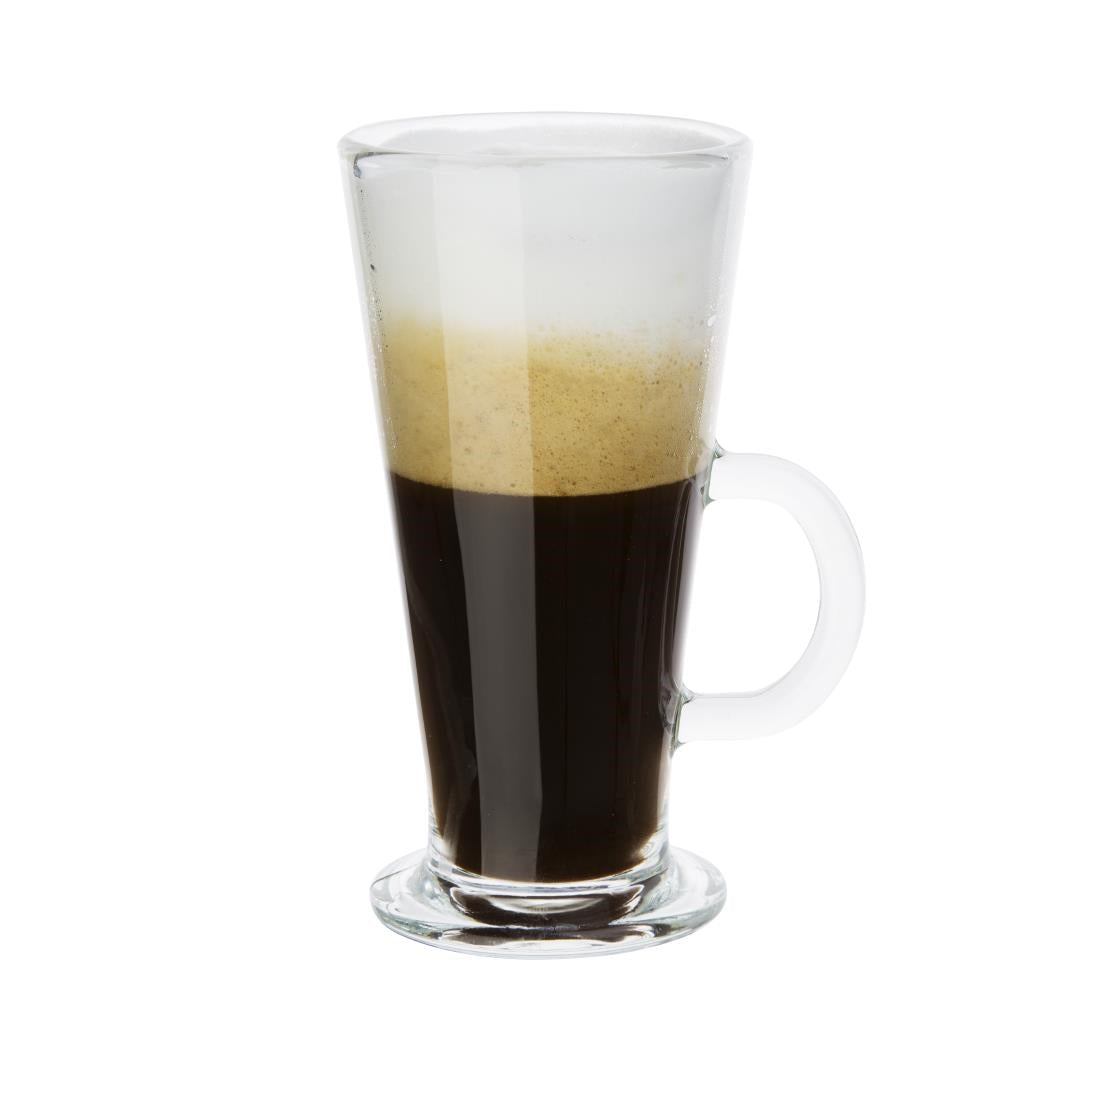 GF929 Olympia Toughened Latte Glasses 285ml (Pack of 12) JD Catering Equipment Solutions Ltd